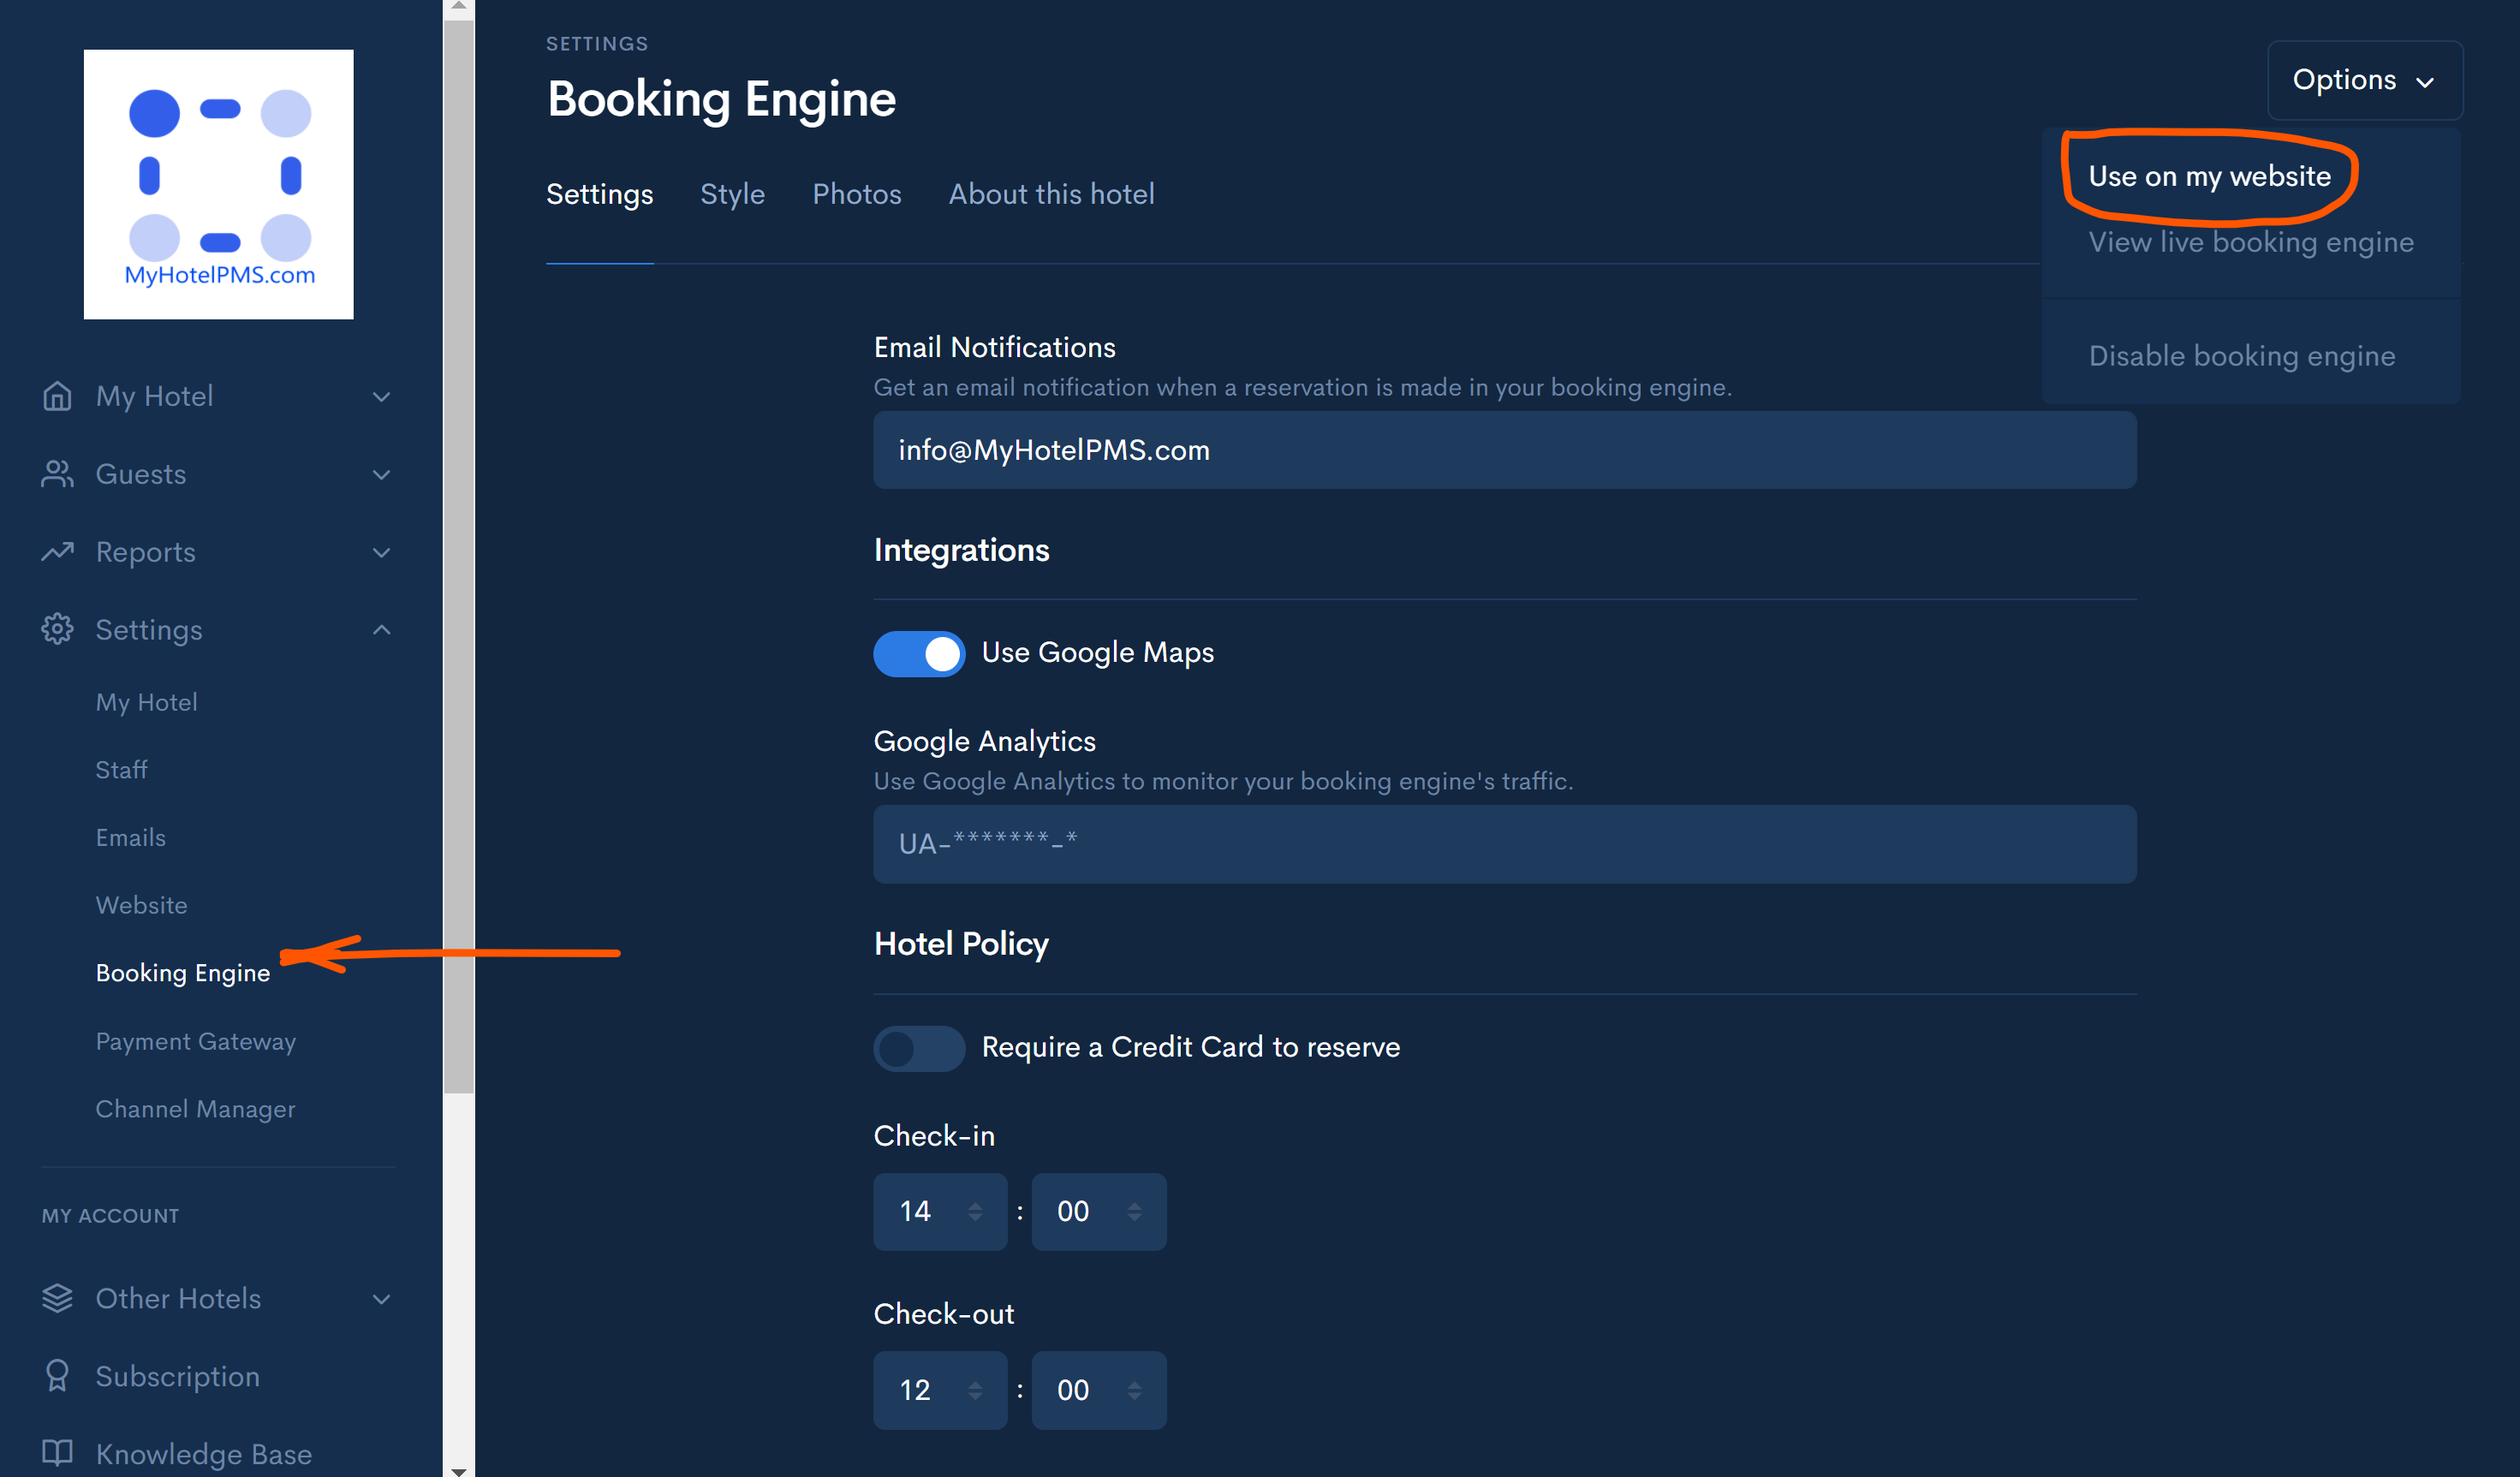 How to add hotel booking engine white label on my Hotel website MyHotelPMS.